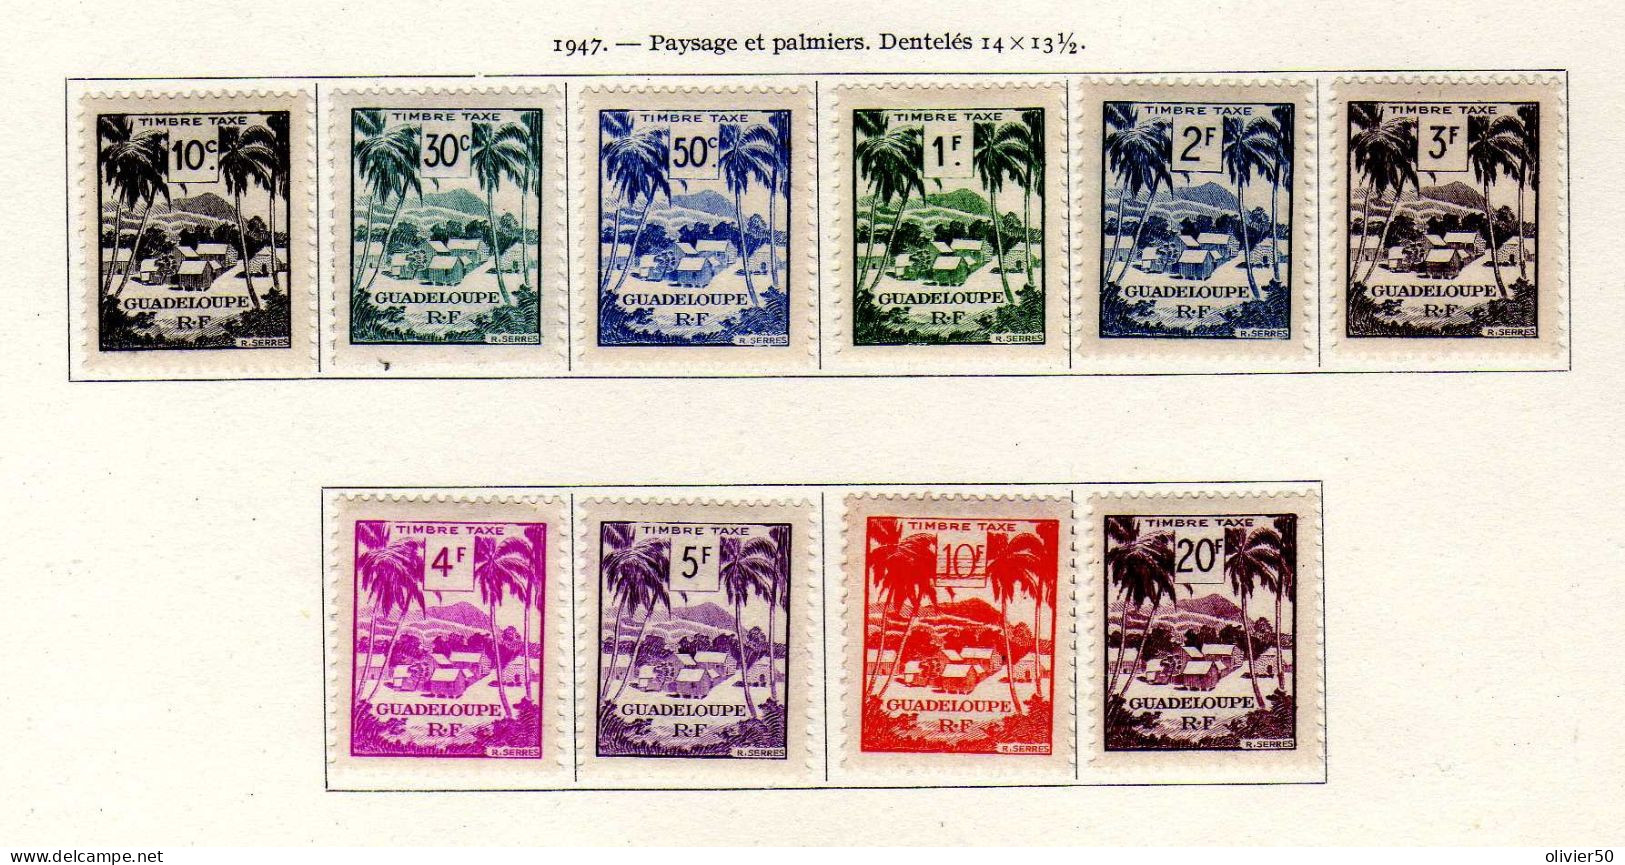 Guadeloupe - 1947 - Timbres-Taxe Palmiers - Neufs* - MH - Segnatasse